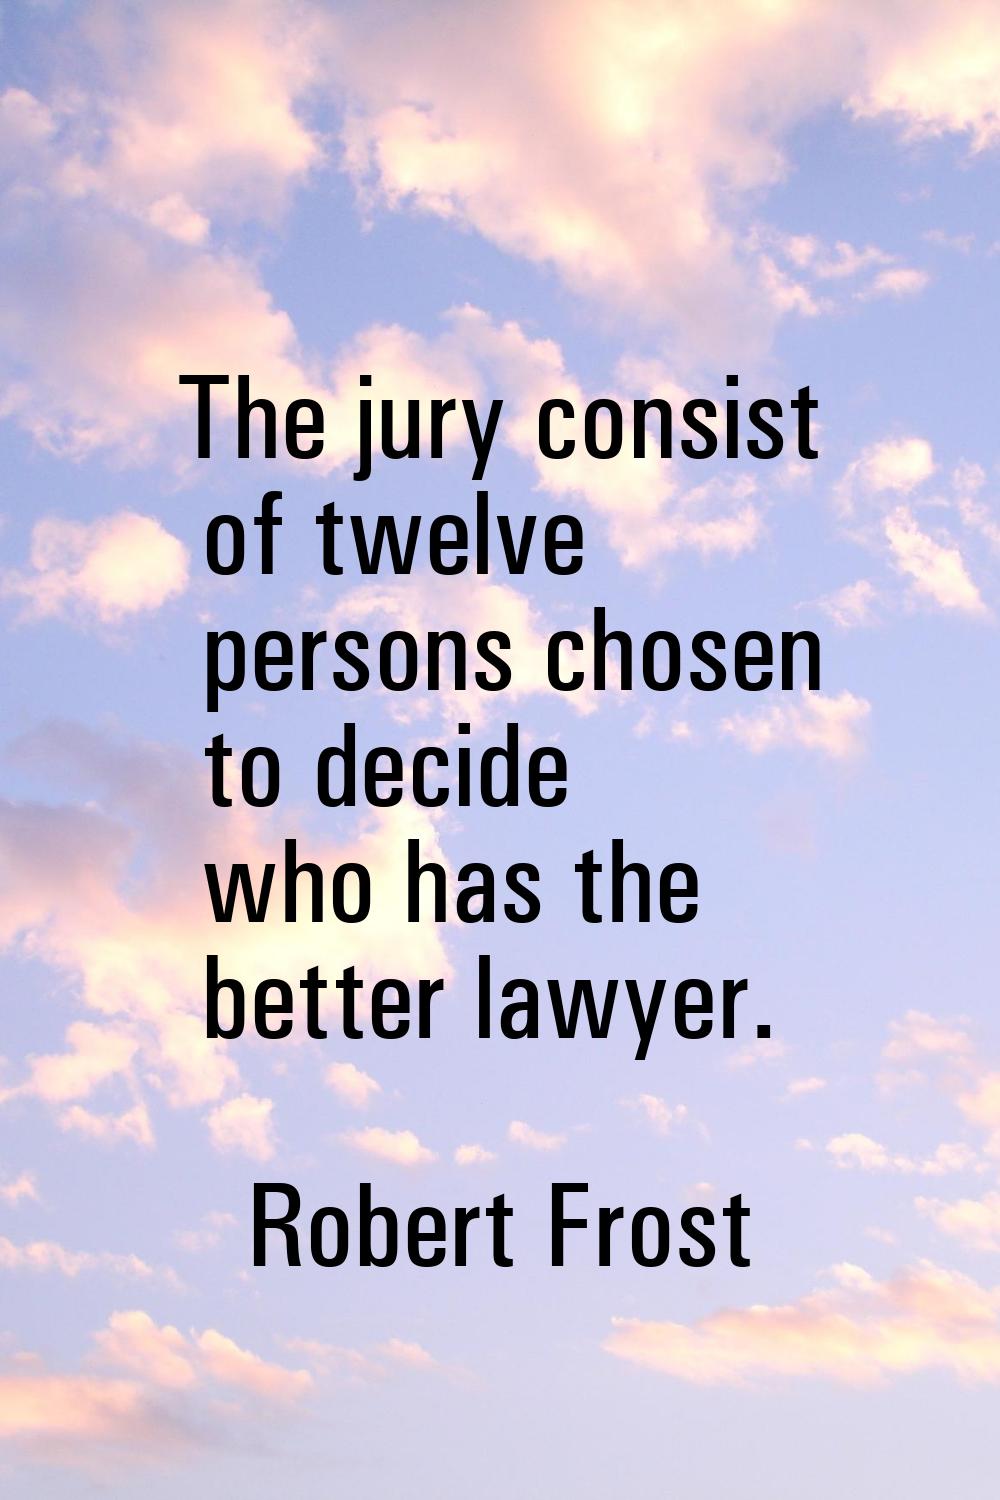 The jury consist of twelve persons chosen to decide who has the better lawyer.